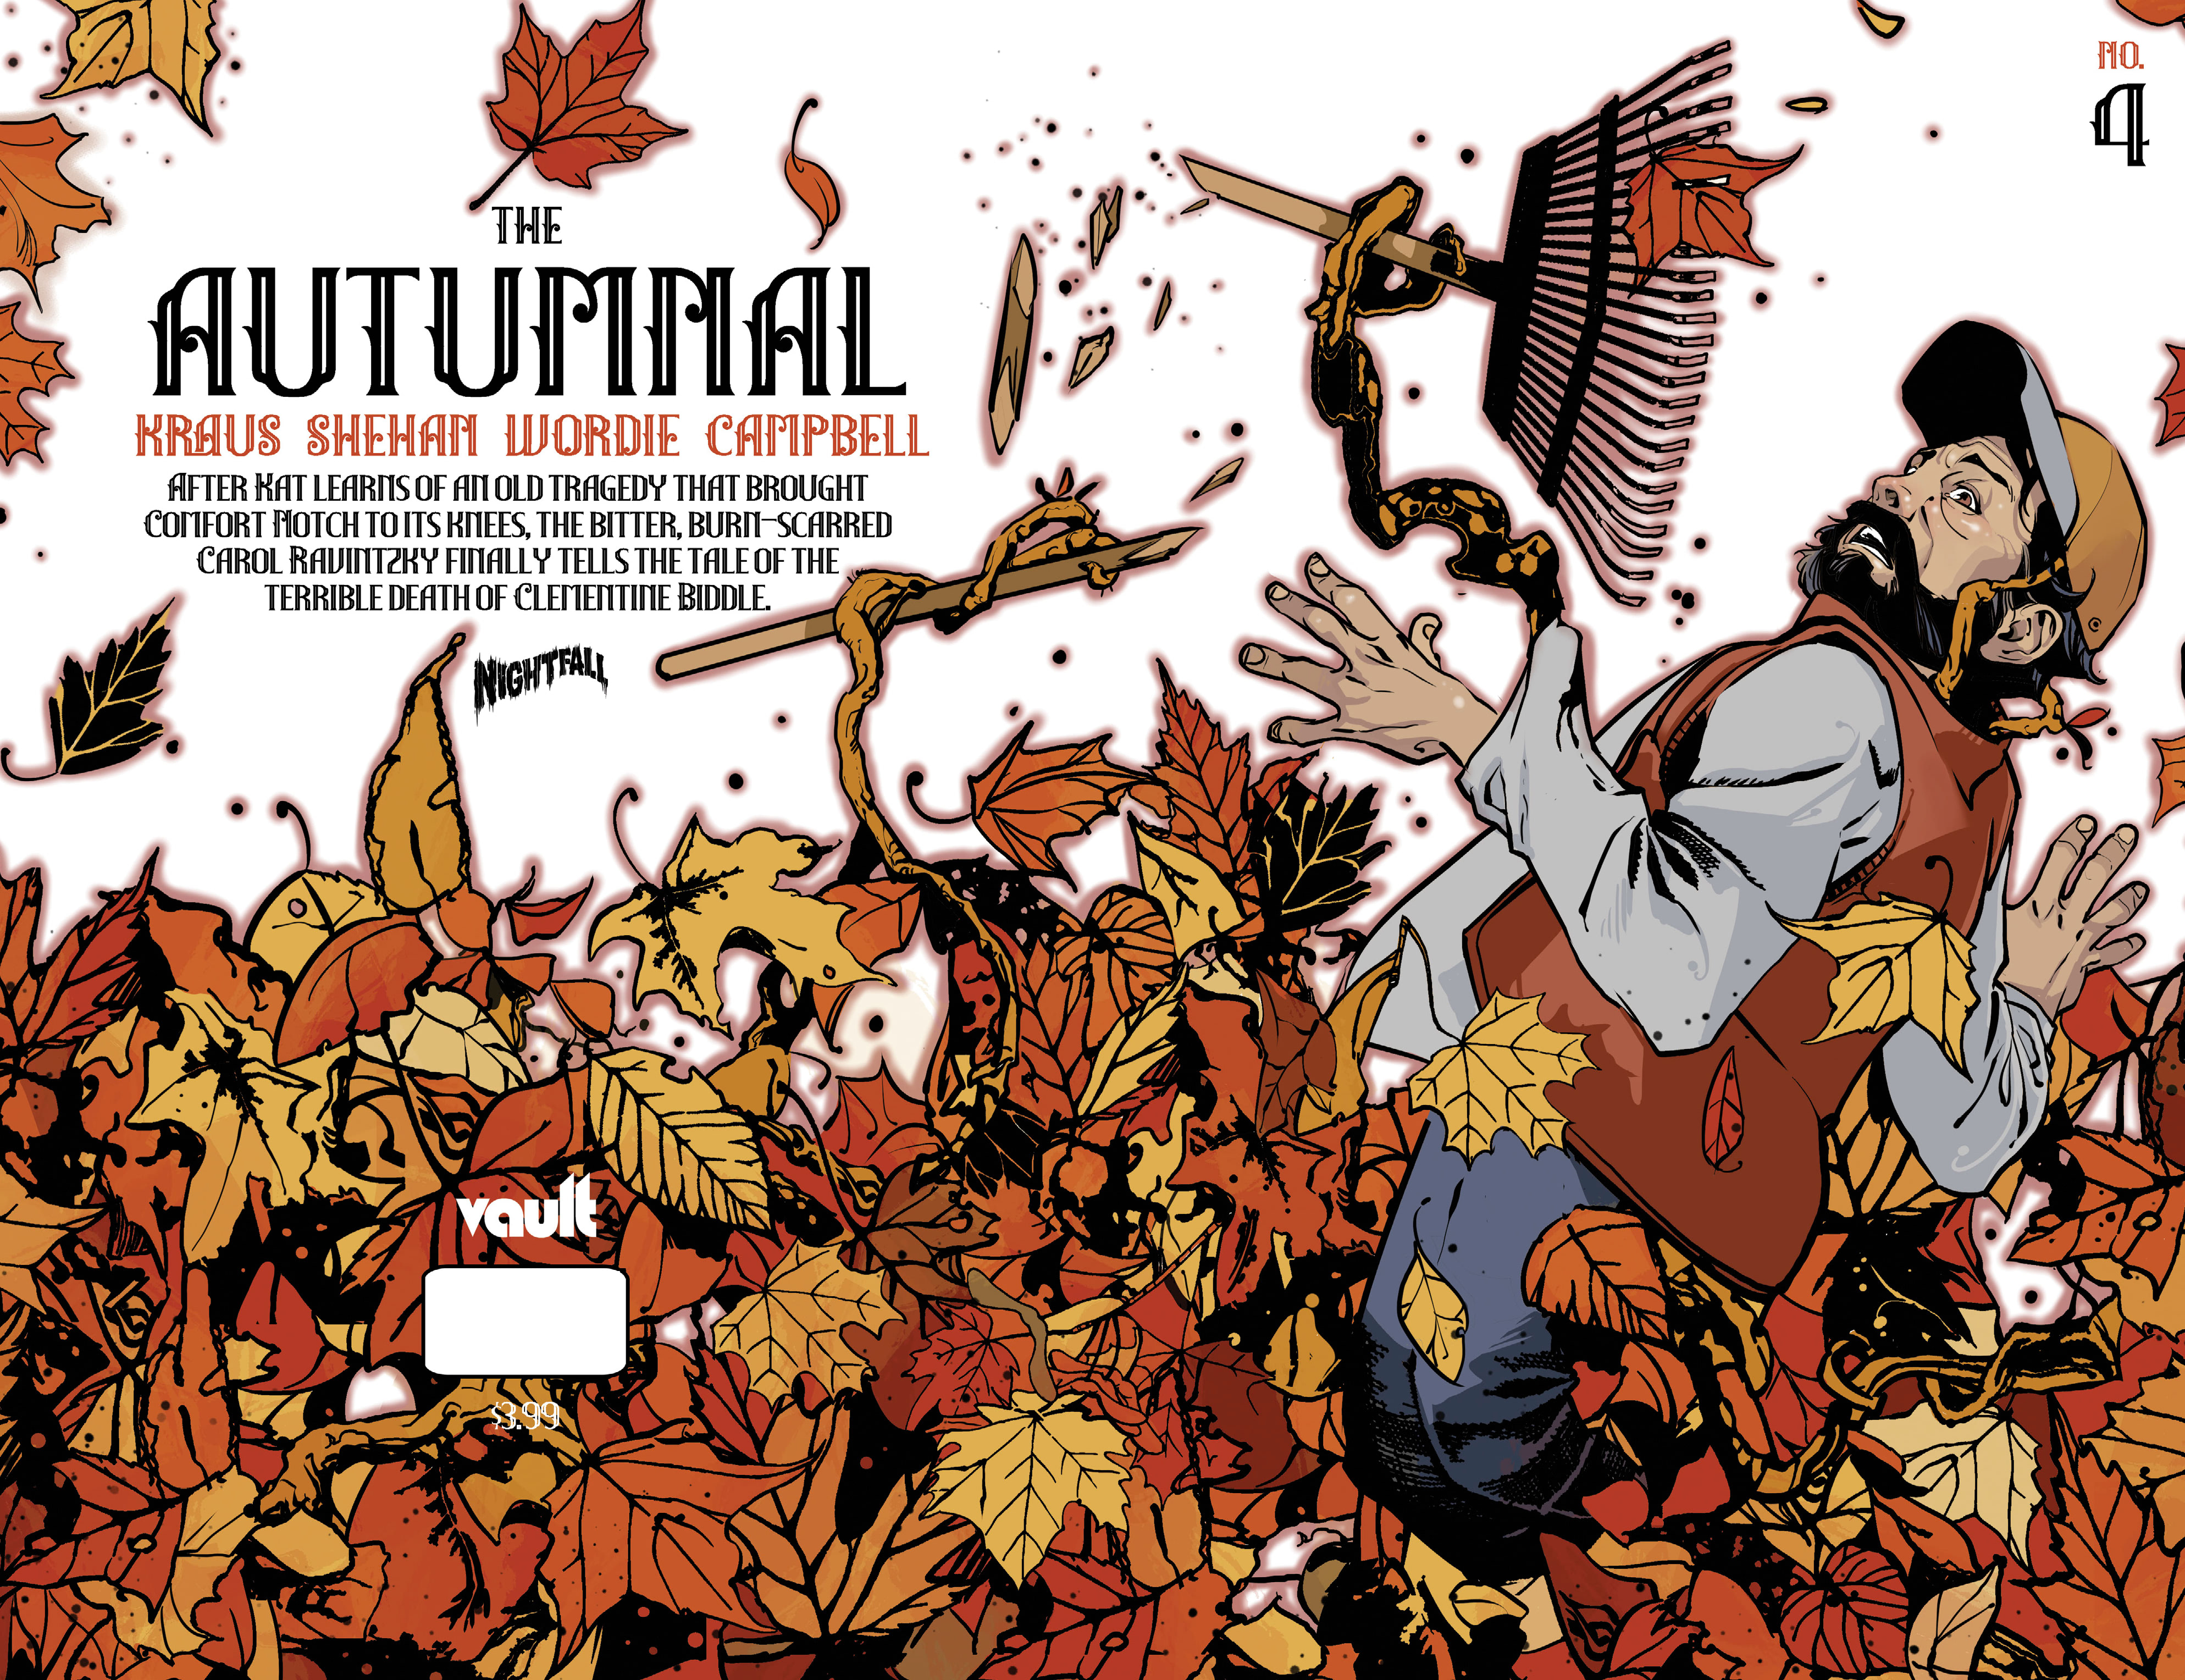 Read online The Autumnal comic -  Issue #4 - 2